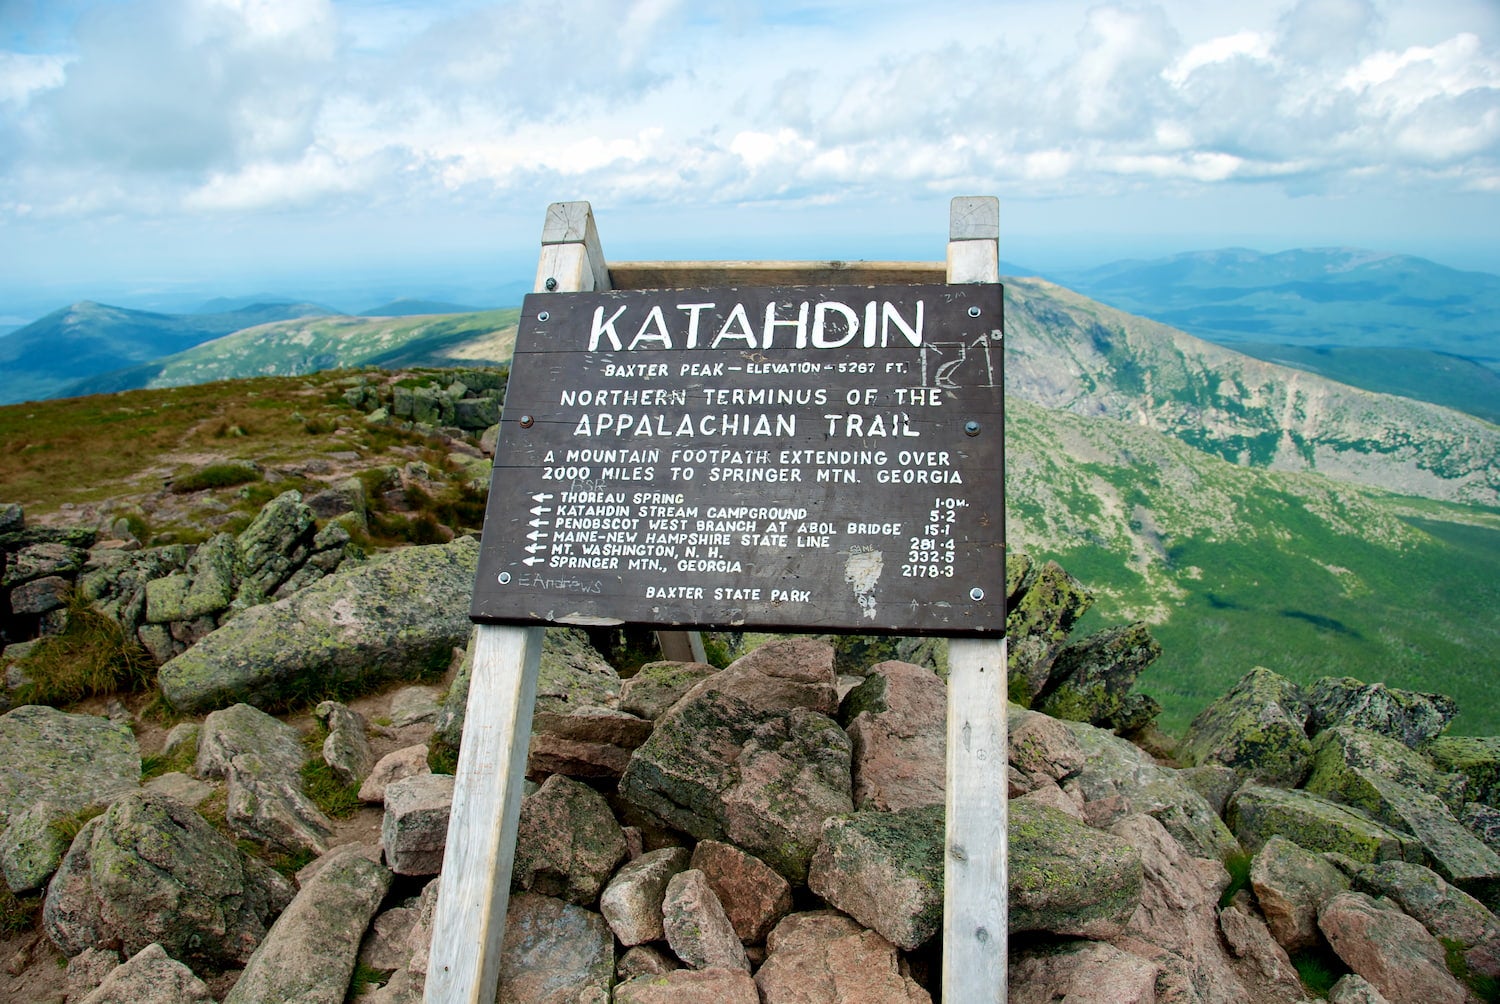 "Kathadin" sign on top of mountain surrounding by green alpine landscape.